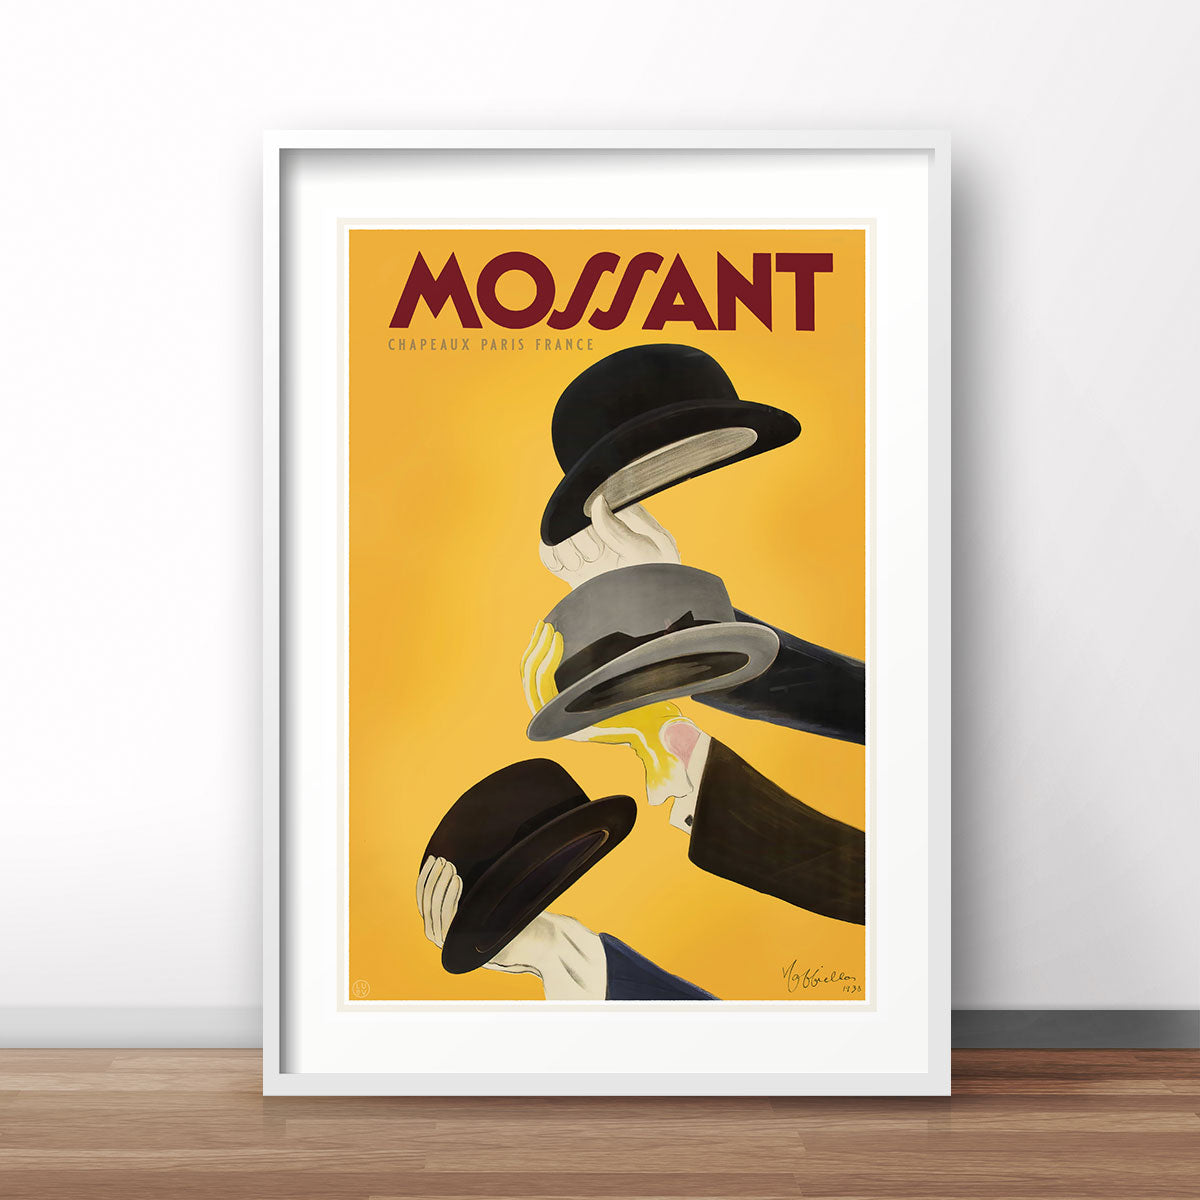 Mossant hats France vintage retro poster from Places We Luv